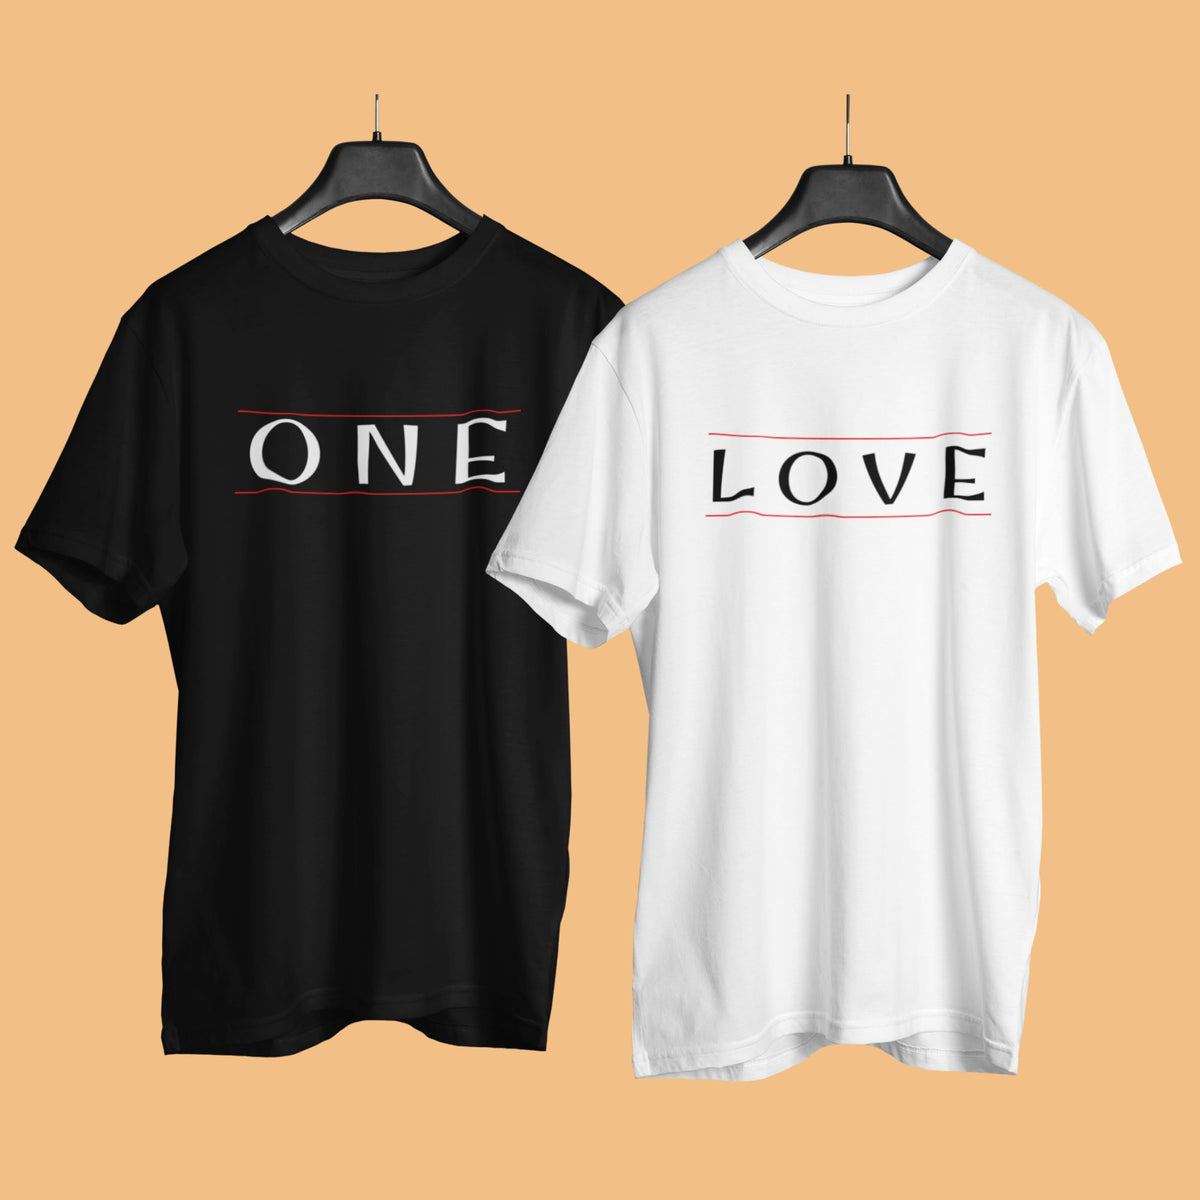 one-love-black-and-white-cotton-printed-couple-t-shirt